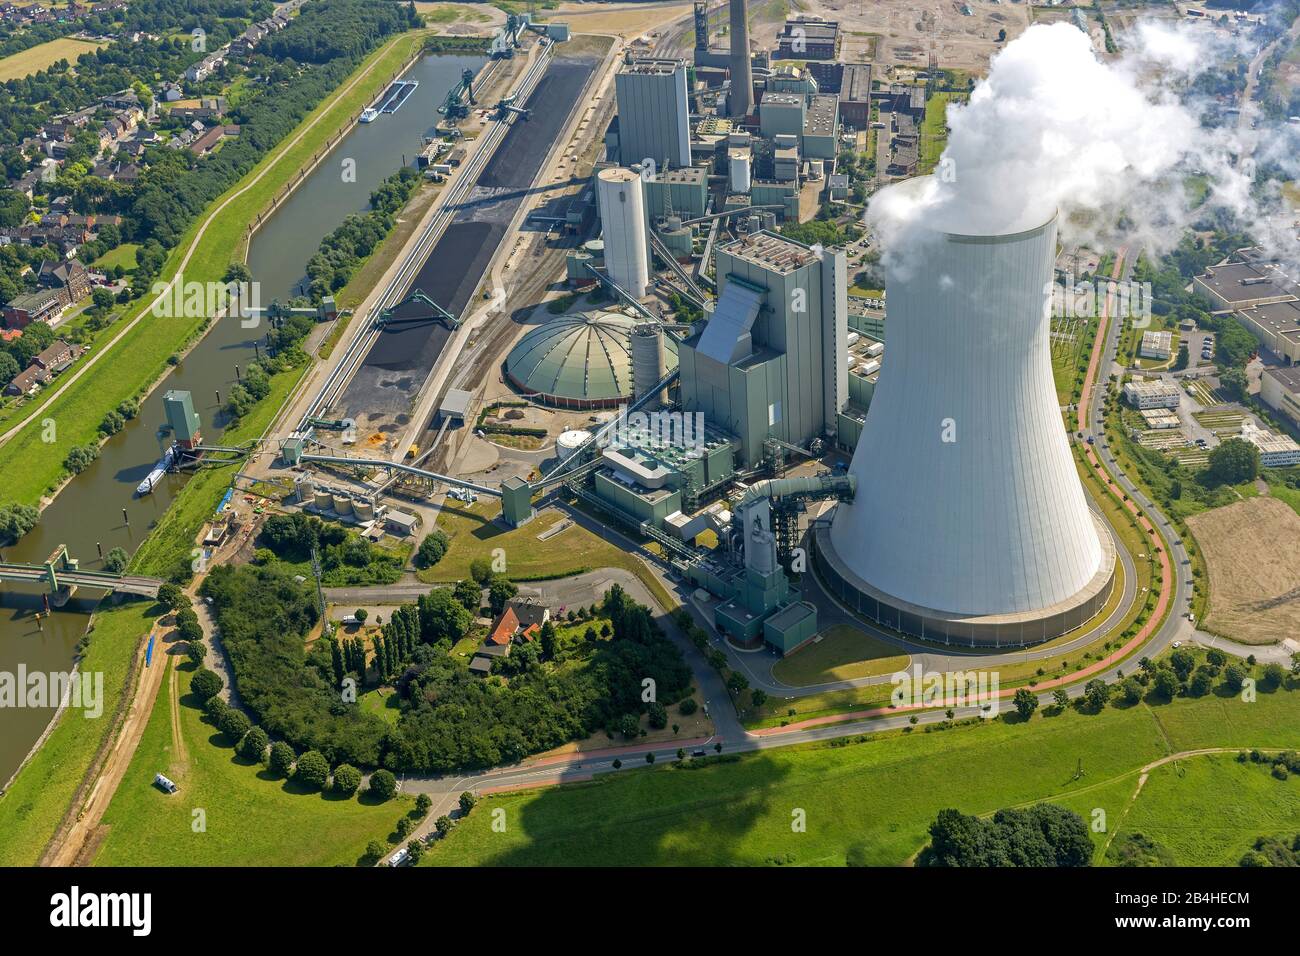 coal-fired power station Duisburg-Walsum at river Rhine, 08.07.2013, aerial view, Germany, North Rhine-Westphalia, Ruhr Area, Duisburg Stock Photo